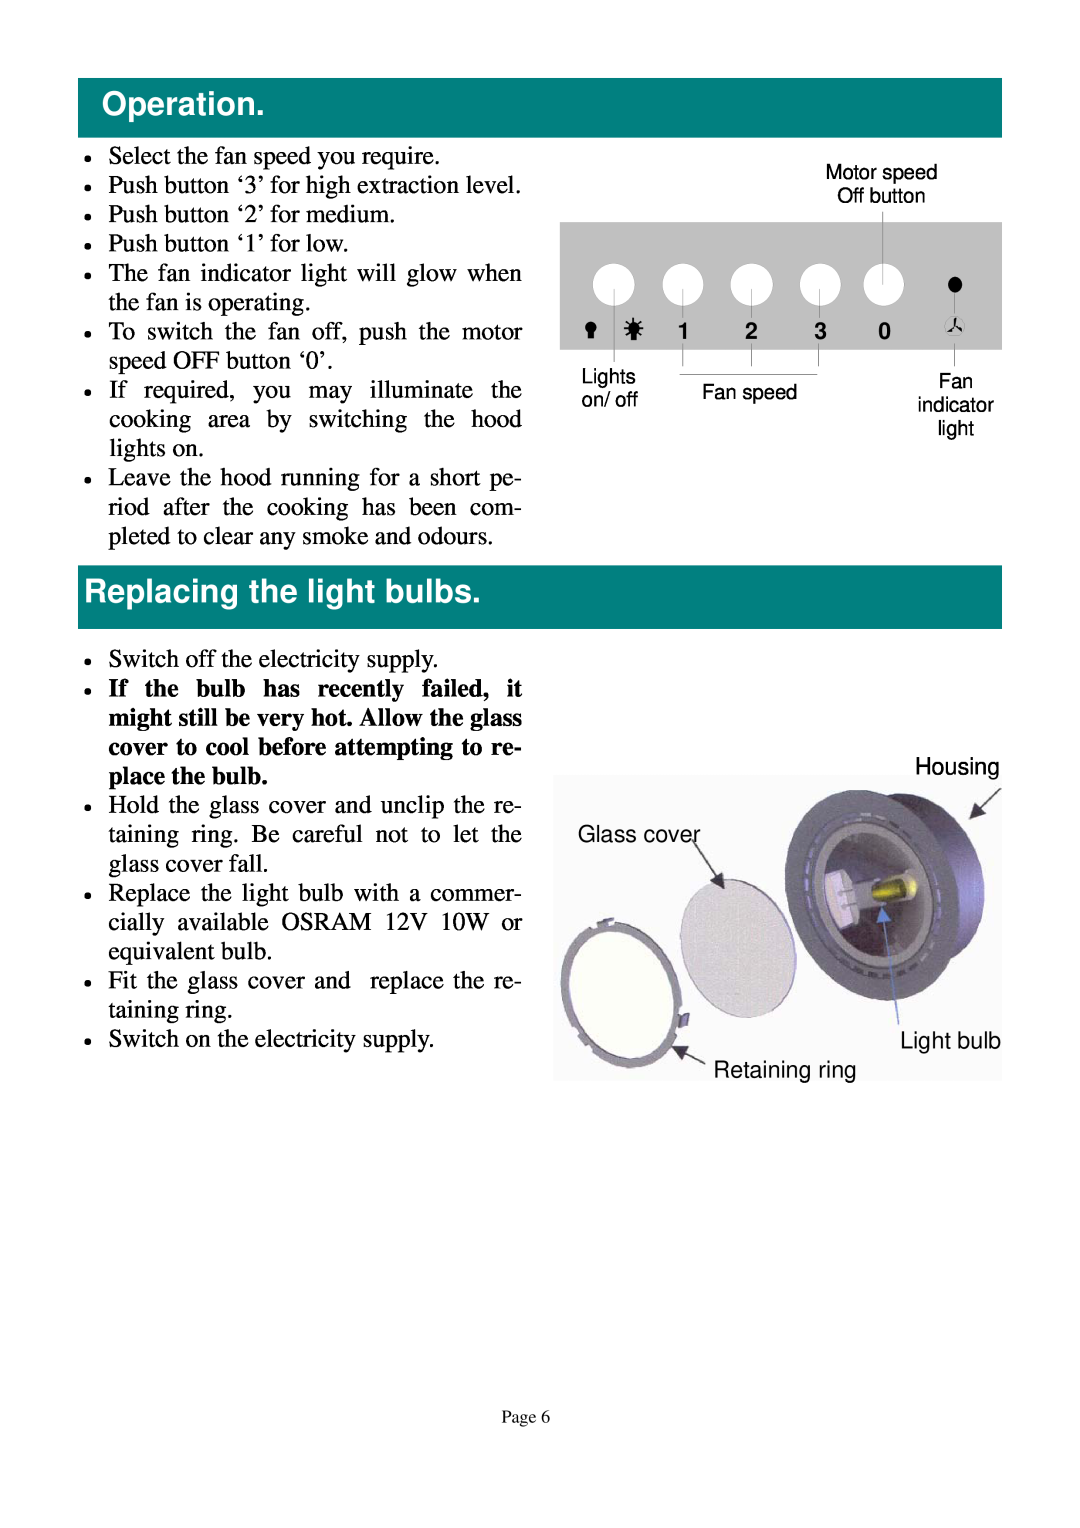 Defy Appliances DCH262 owner manual Operation, Replacing the light bulbs 